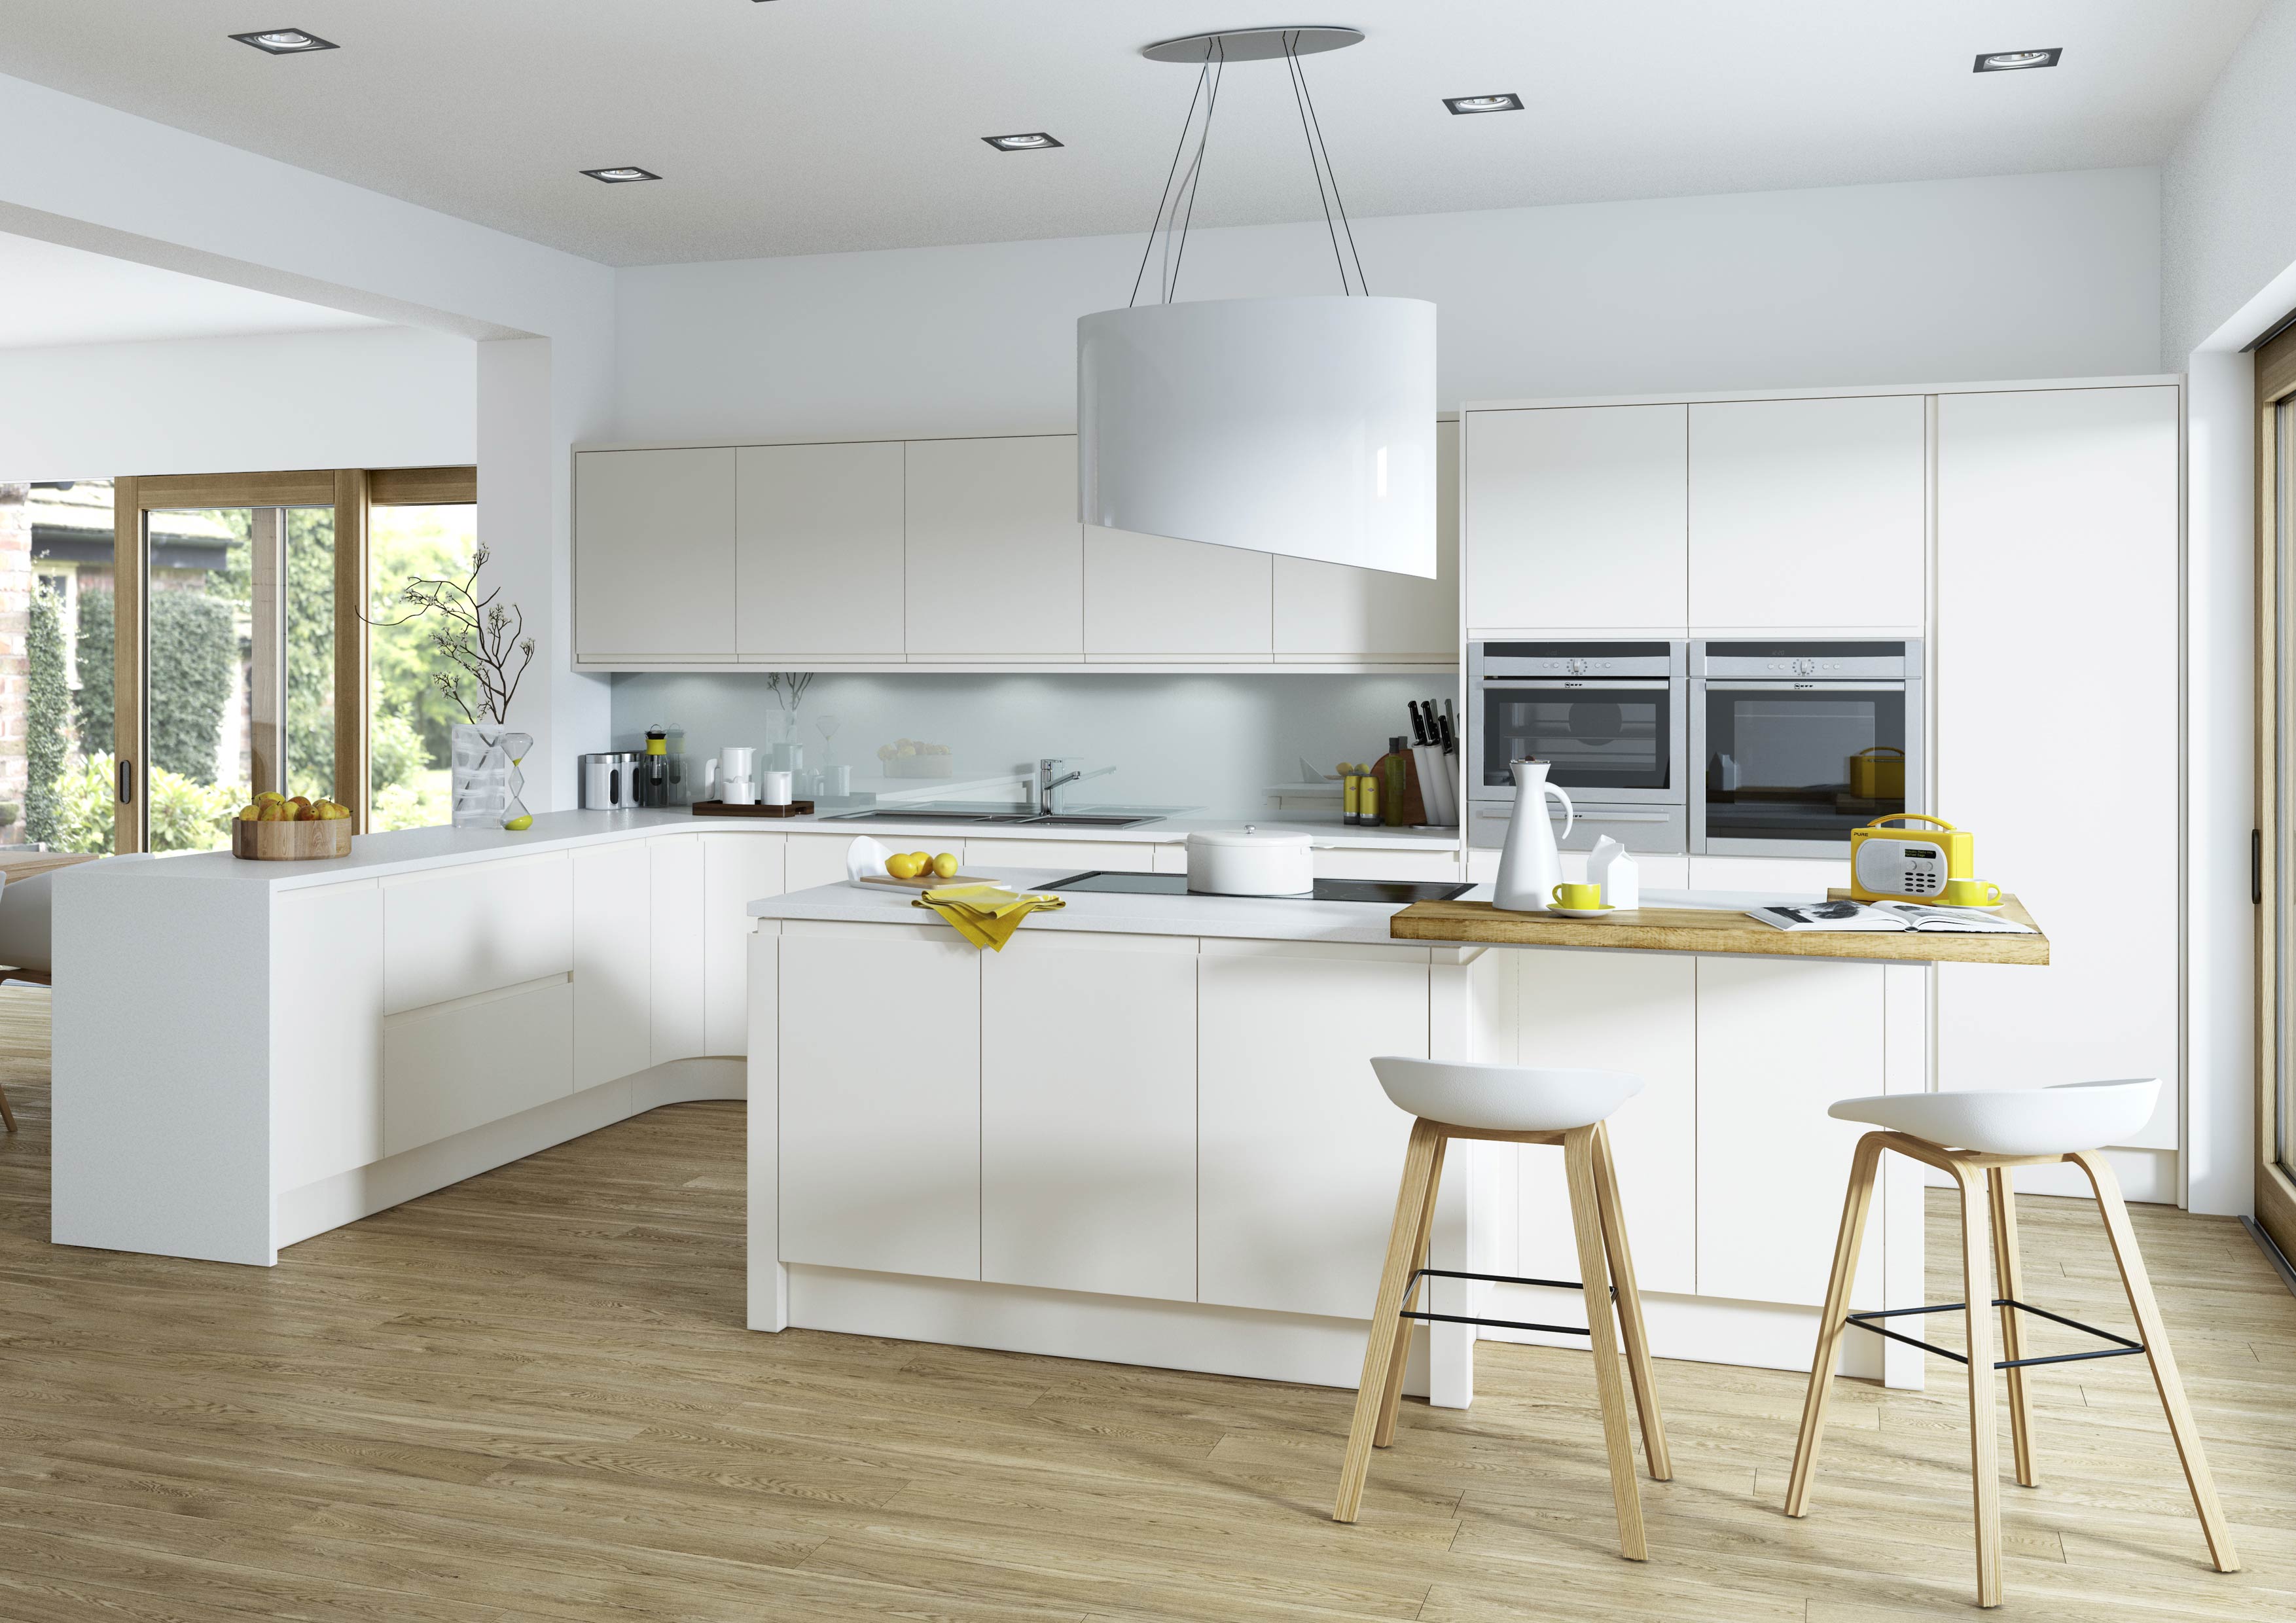 handleless kitchens - Any colour - Irresistible prices